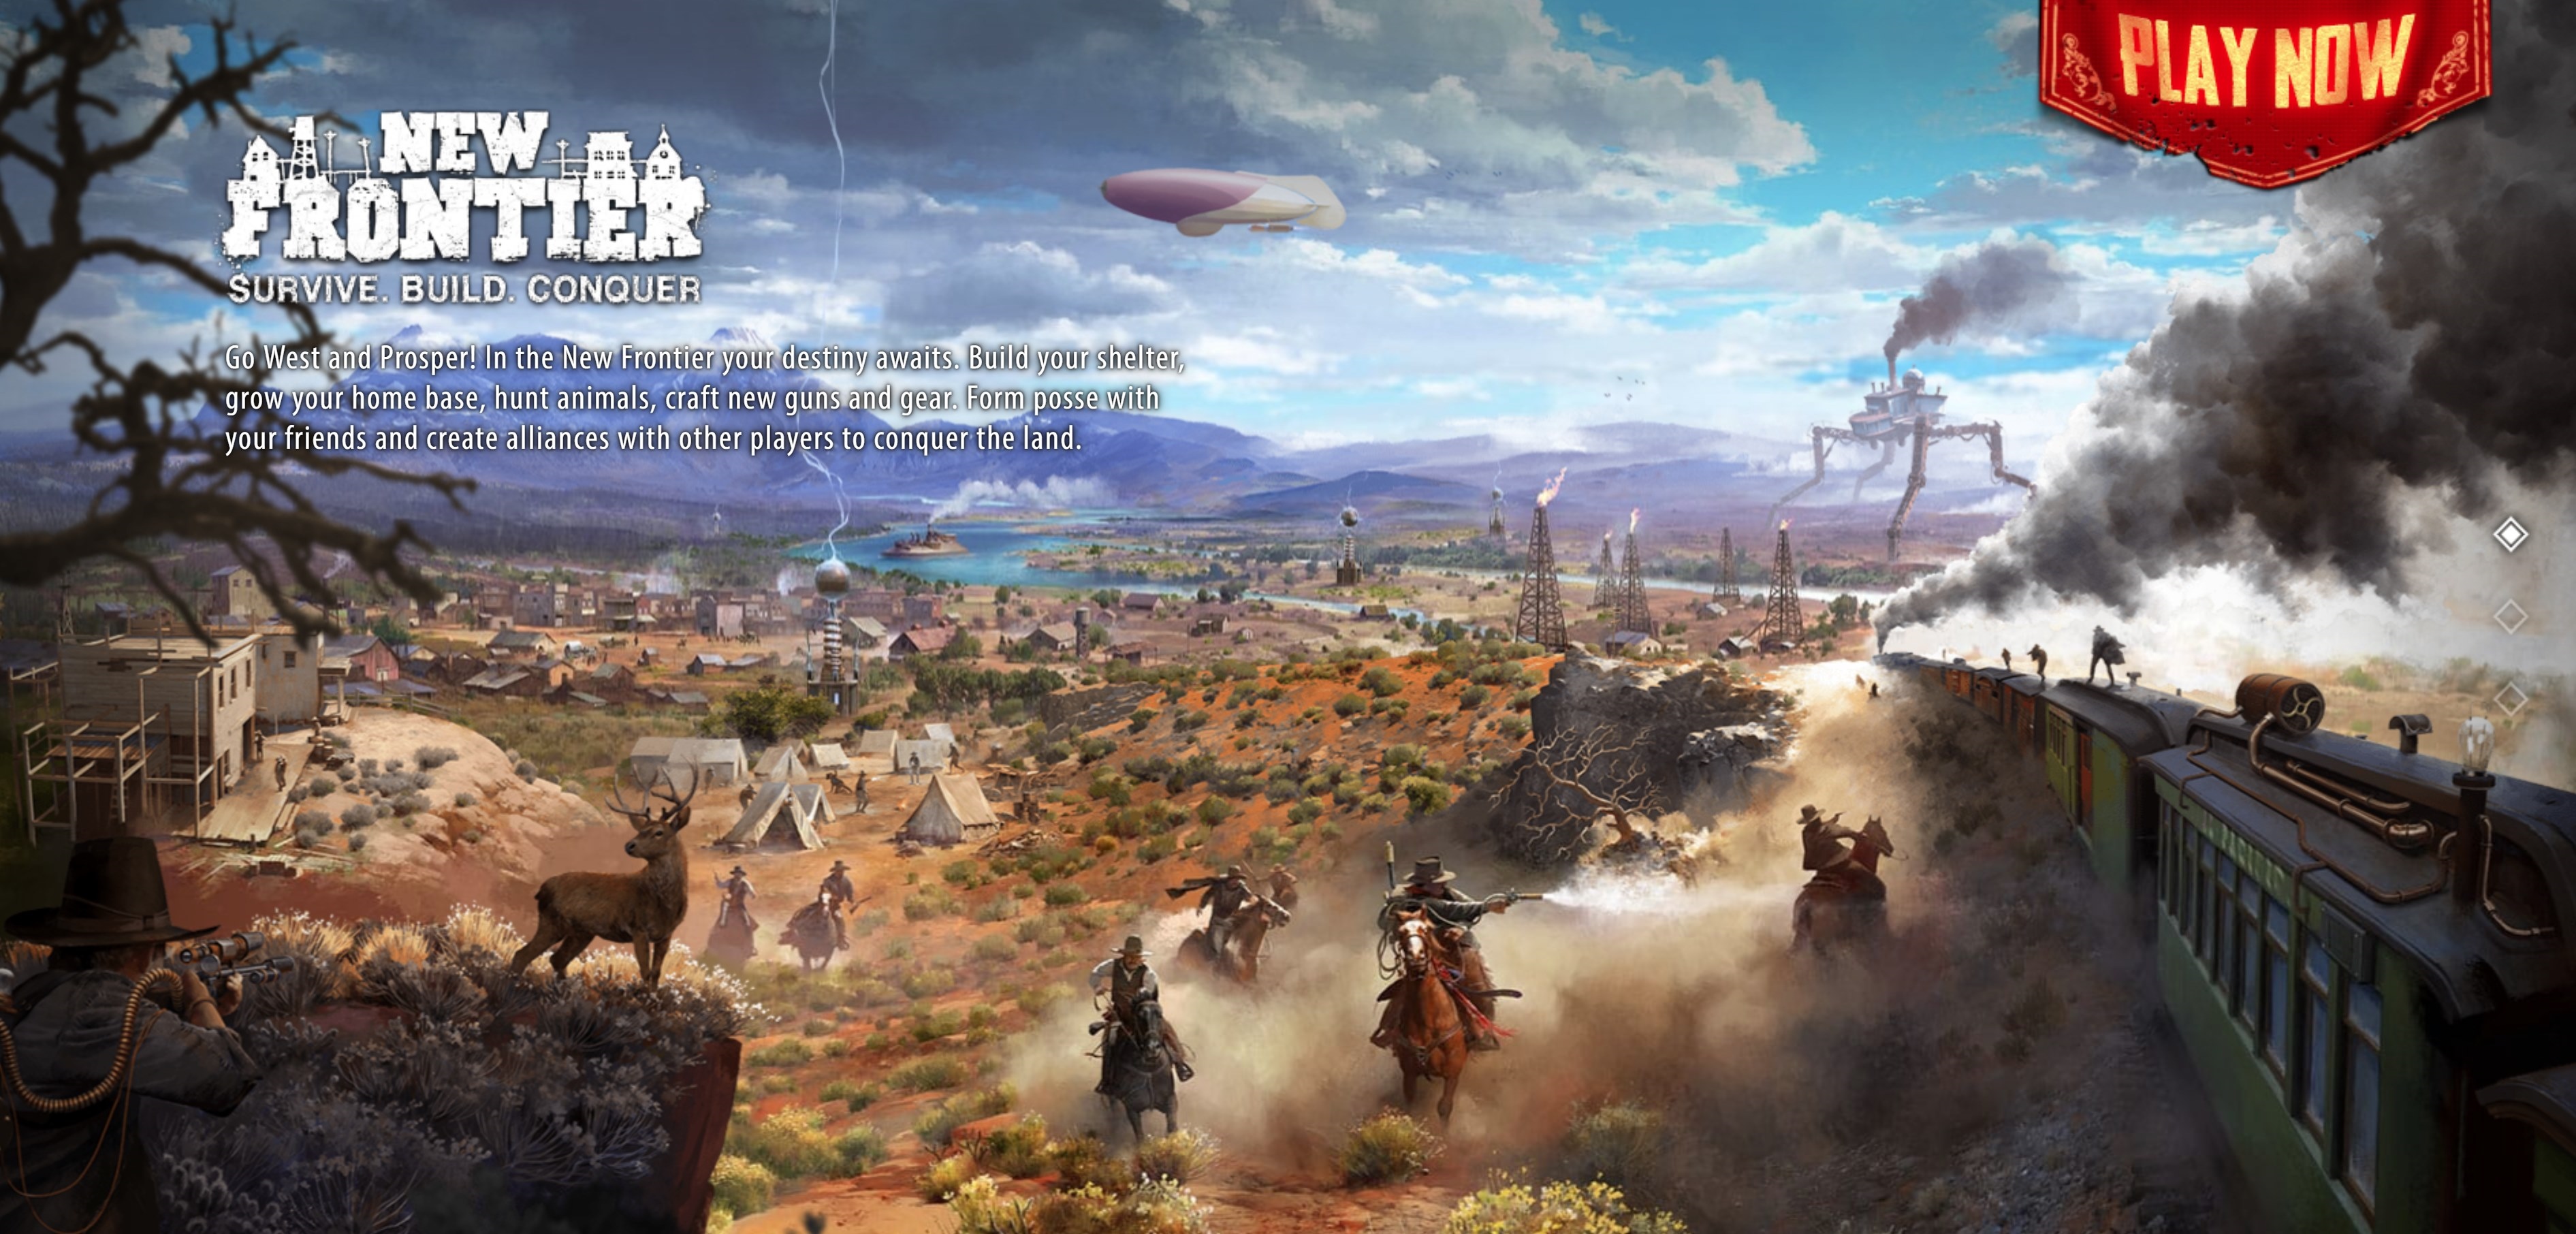 wild west new frontier game download for pc